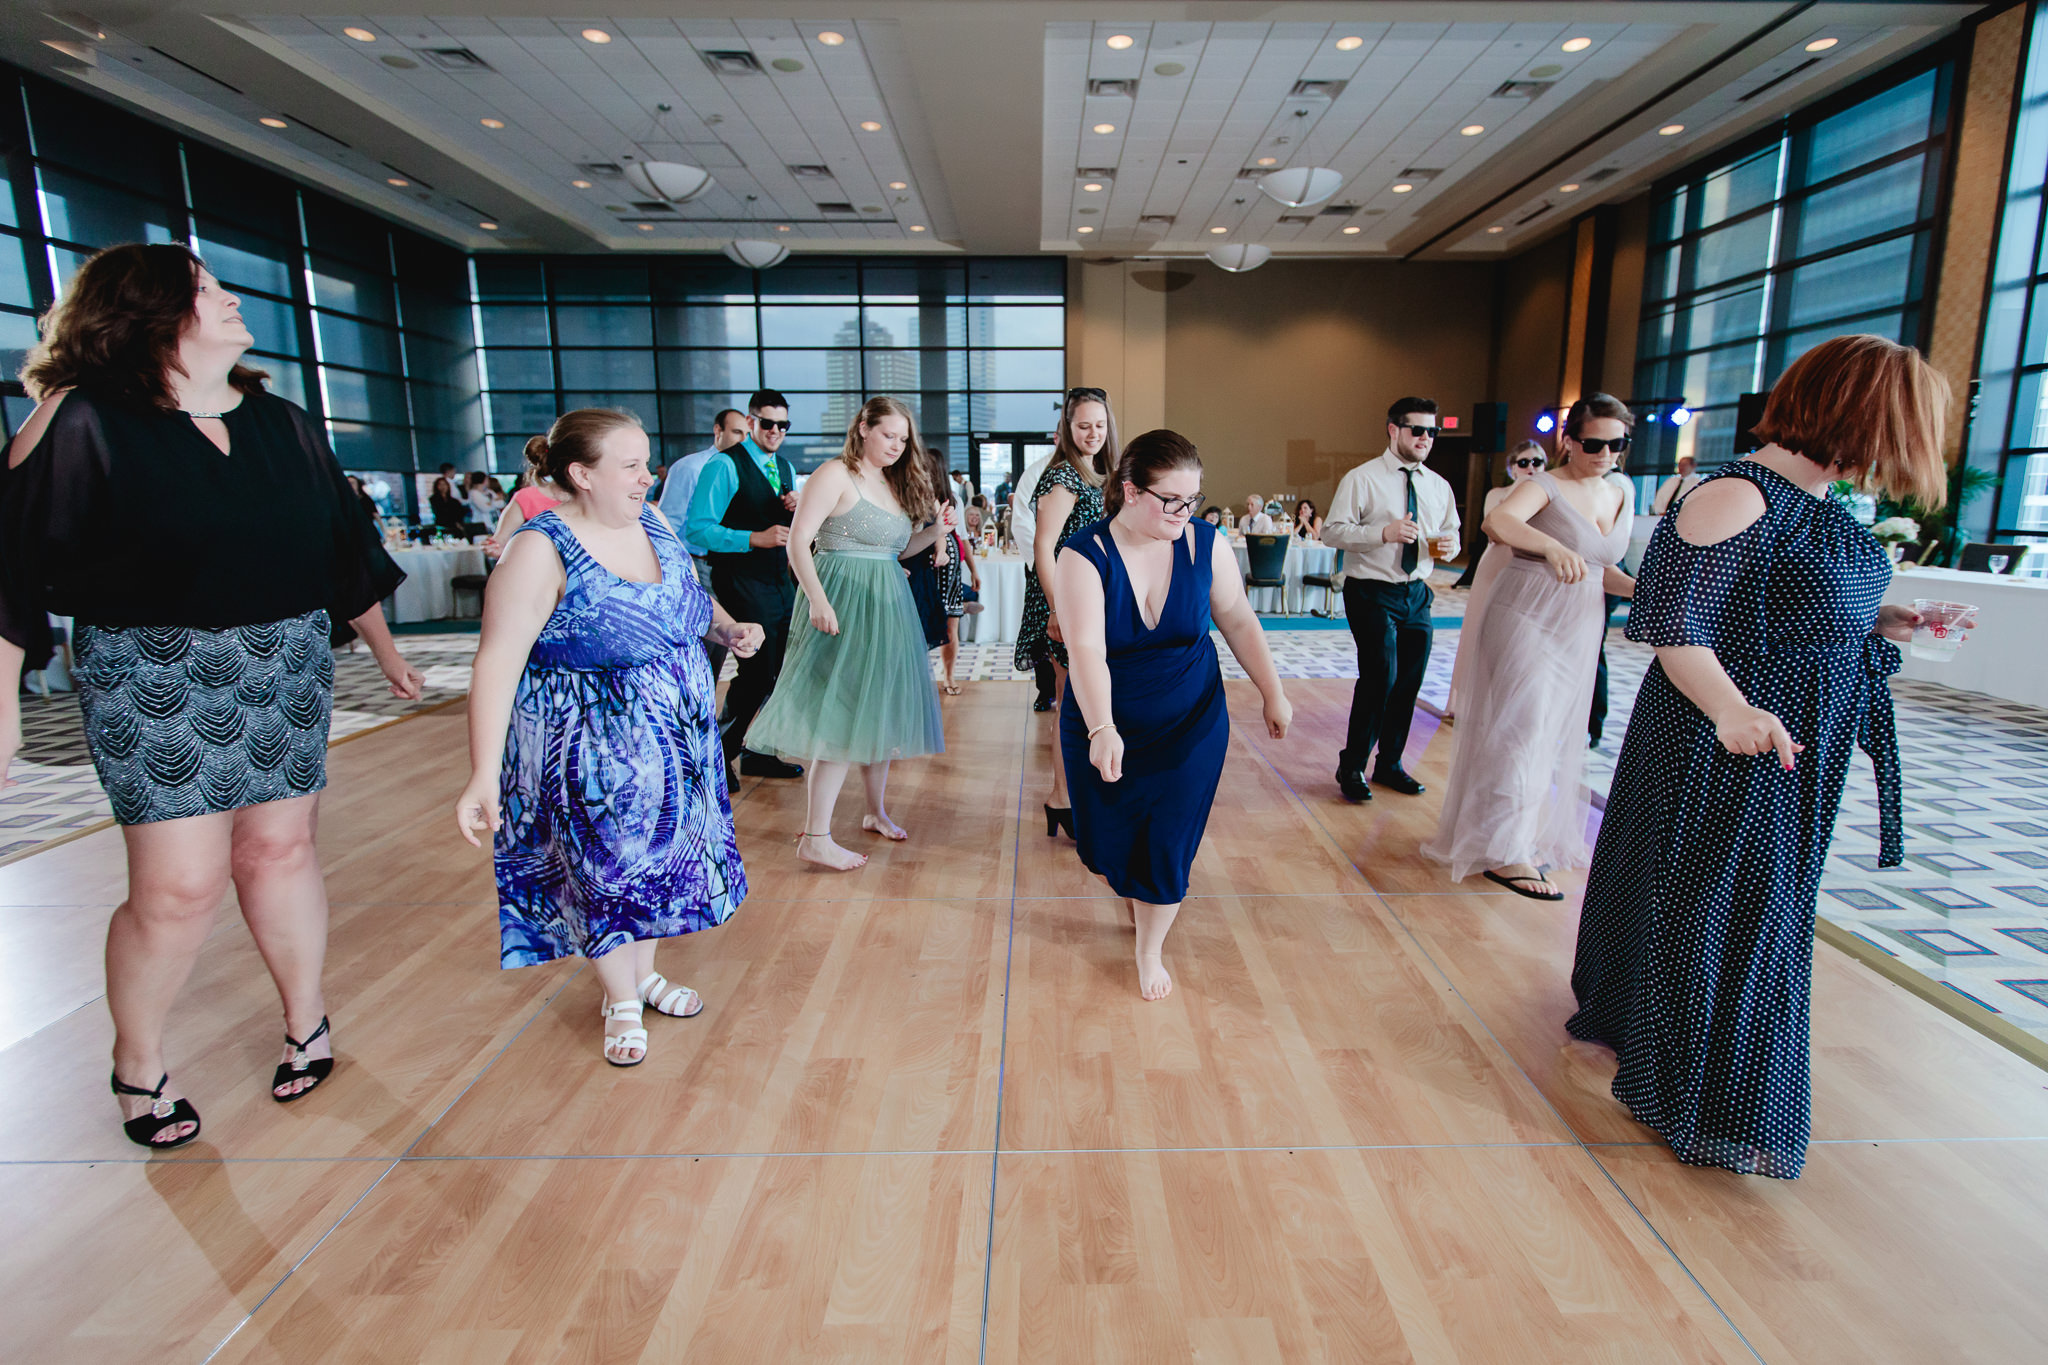 Guests line dancing at a Duquesne University wedding reception